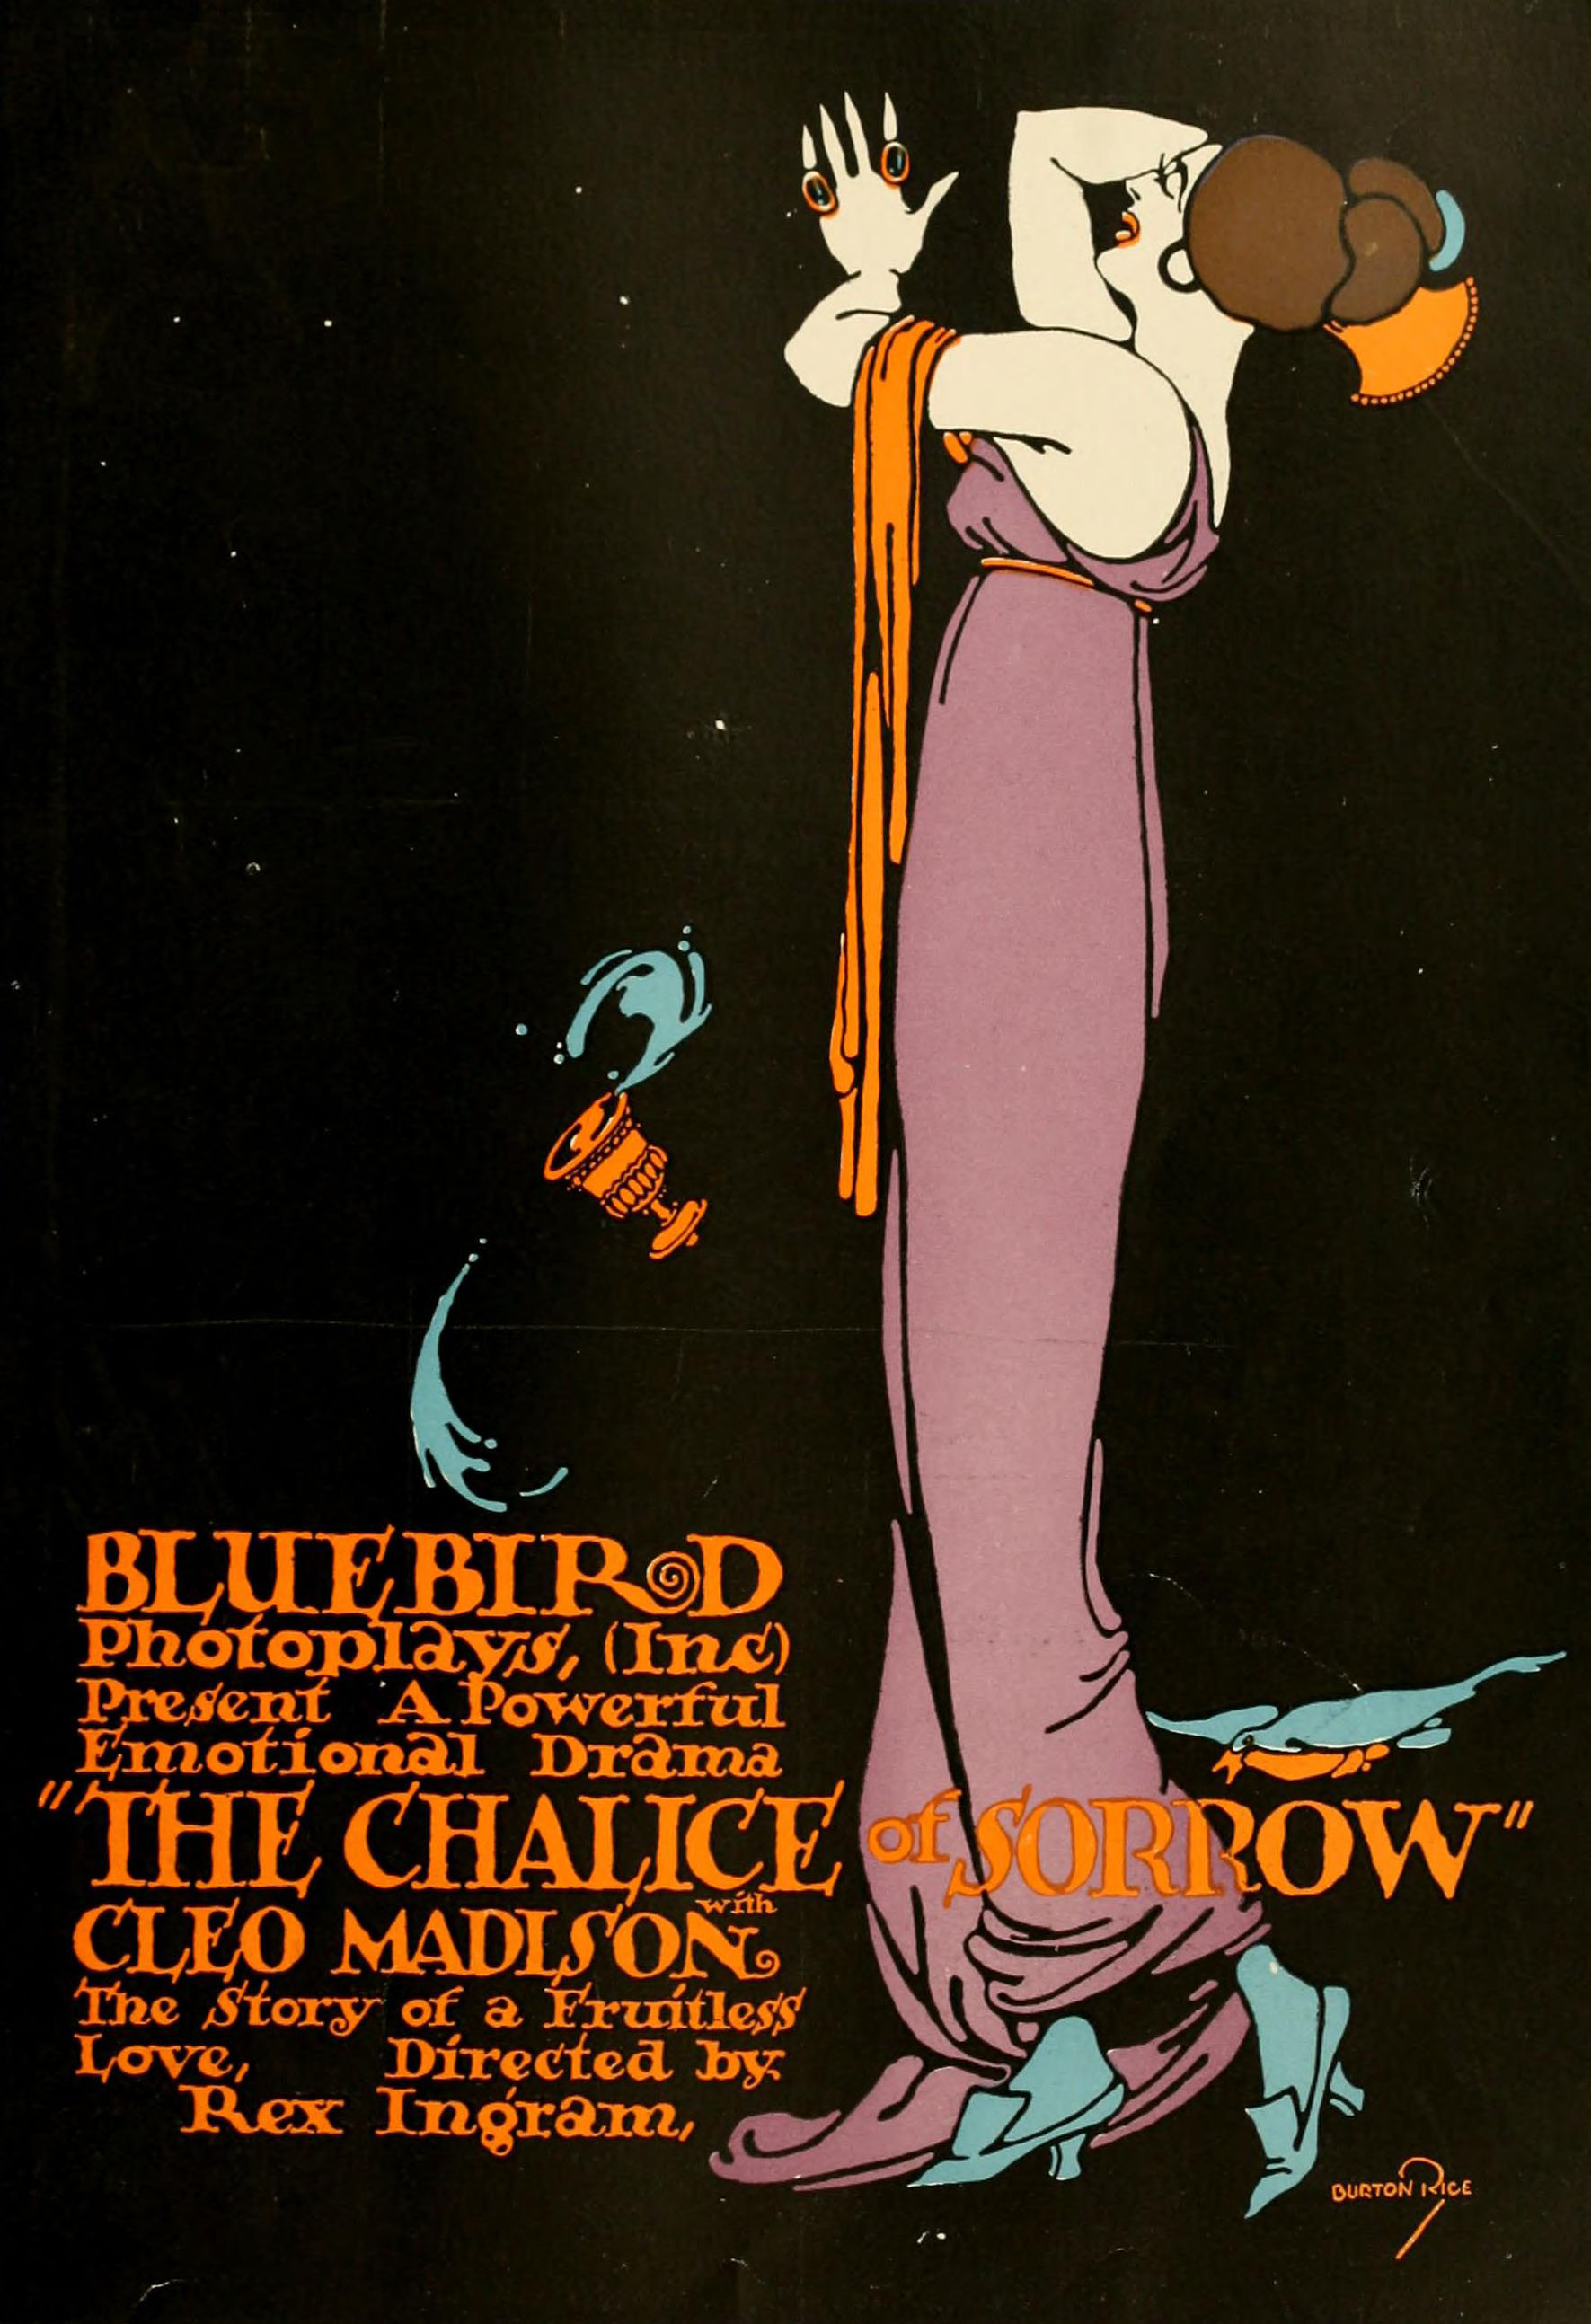 Advertisement for The Chalice of Sorrow (1916). Signed: Burton Rice